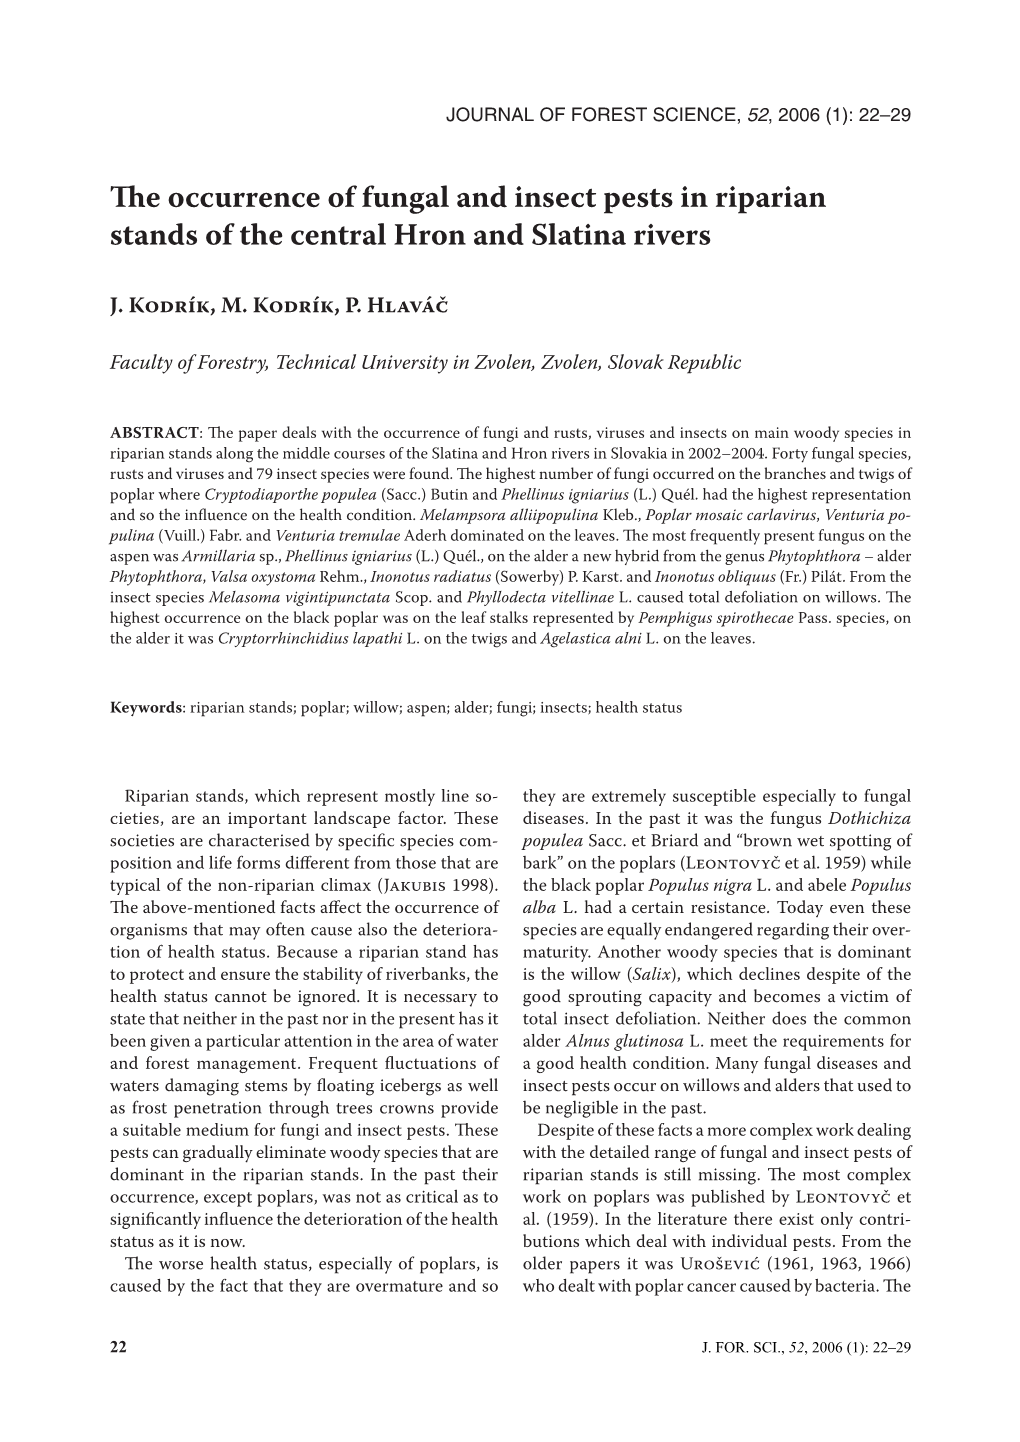 The Occurrence of Fungal and Insect Pests in Riparian Stands of the Central Hron and Slatina Rivers